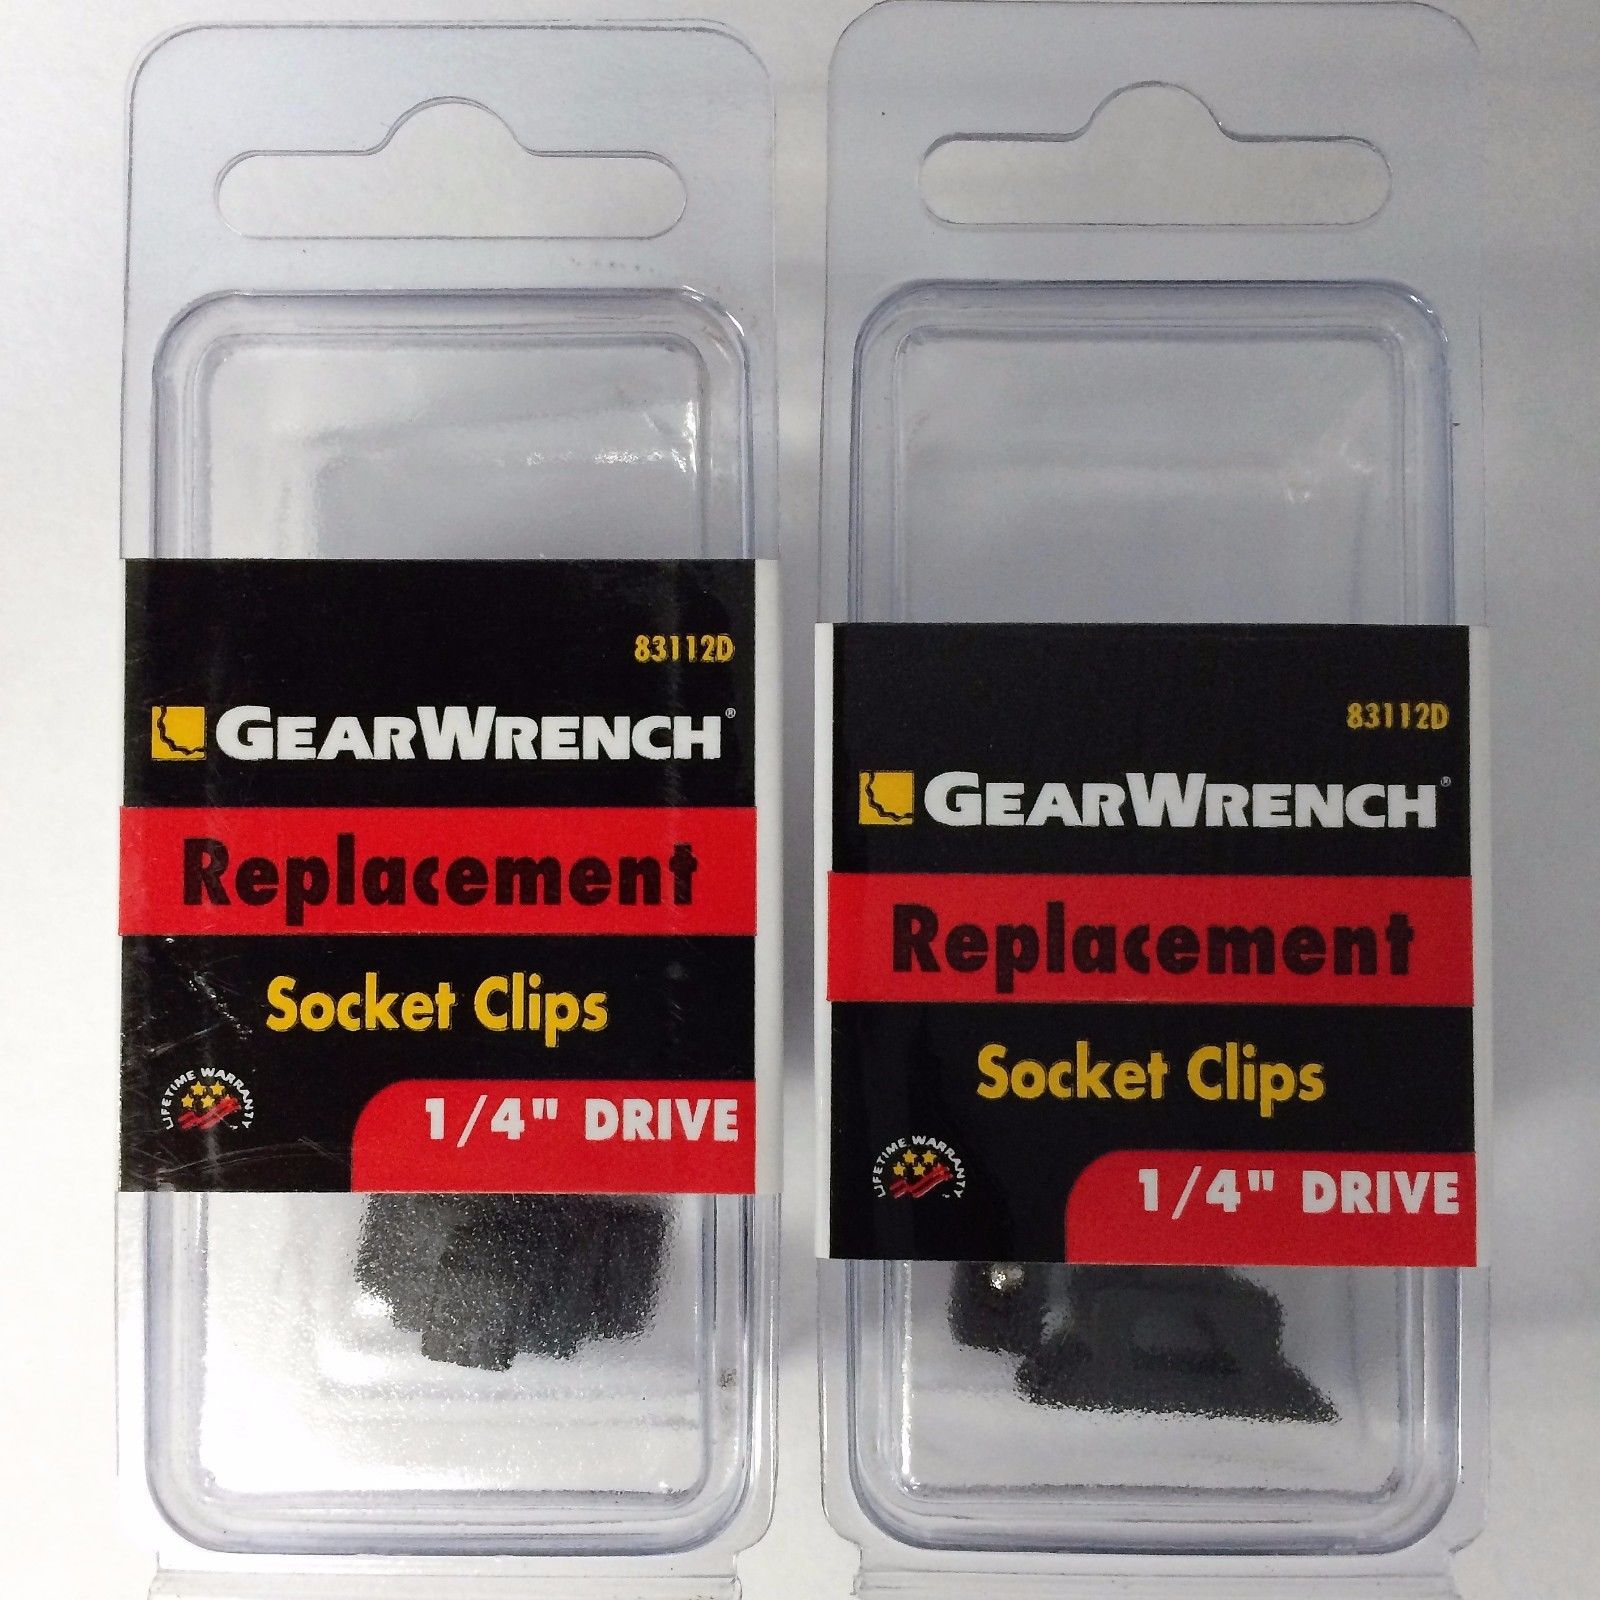 Gearwrench 83112D Replacement Socket Clips 1/4" Drive 2 Packs